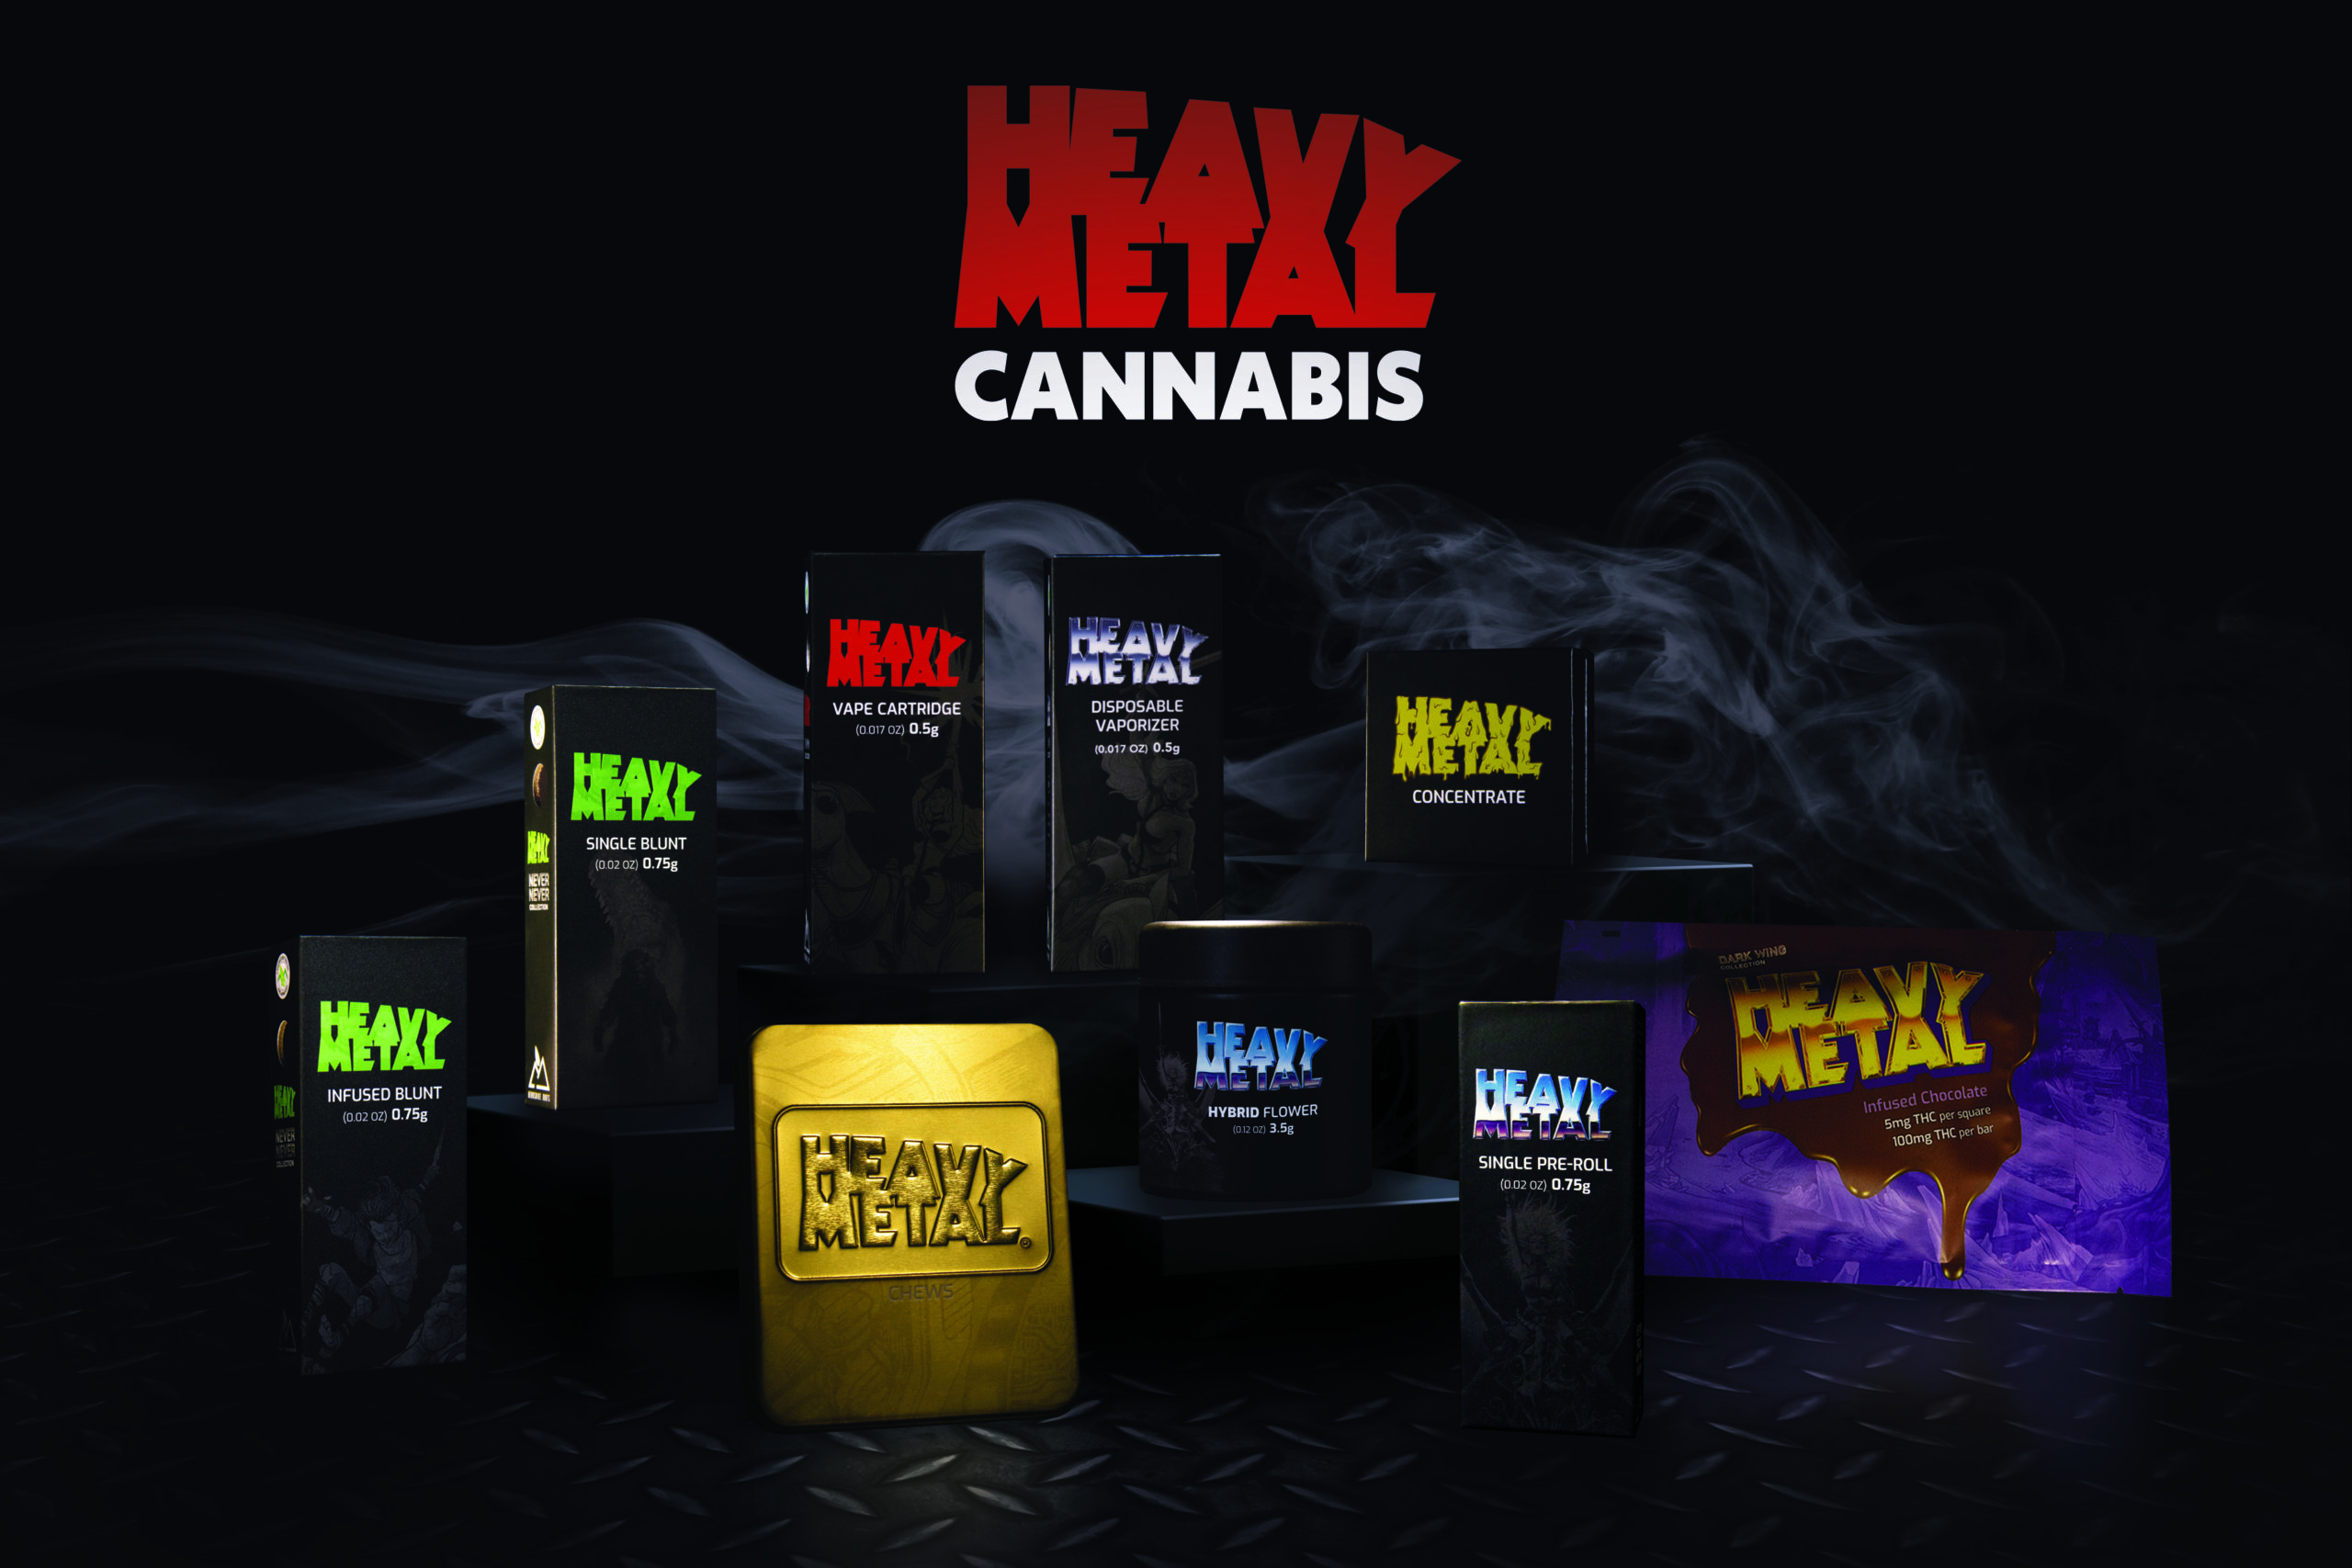 Full HM product line with background smoke